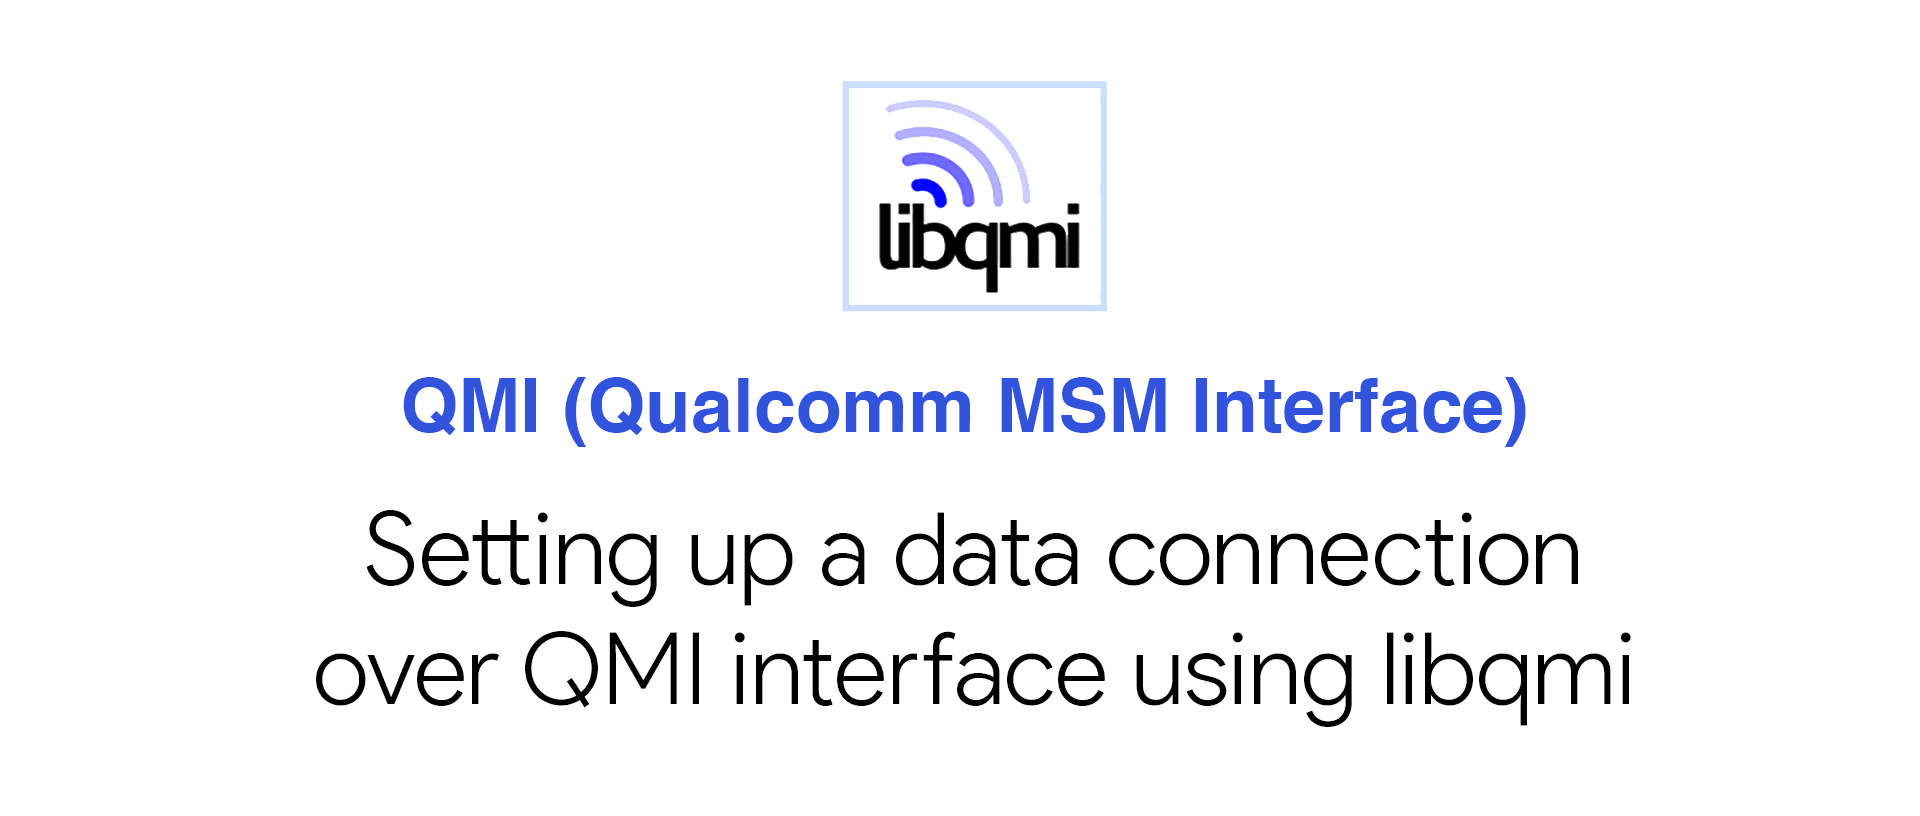 Setting up a data connection over QMI interface using libqmi